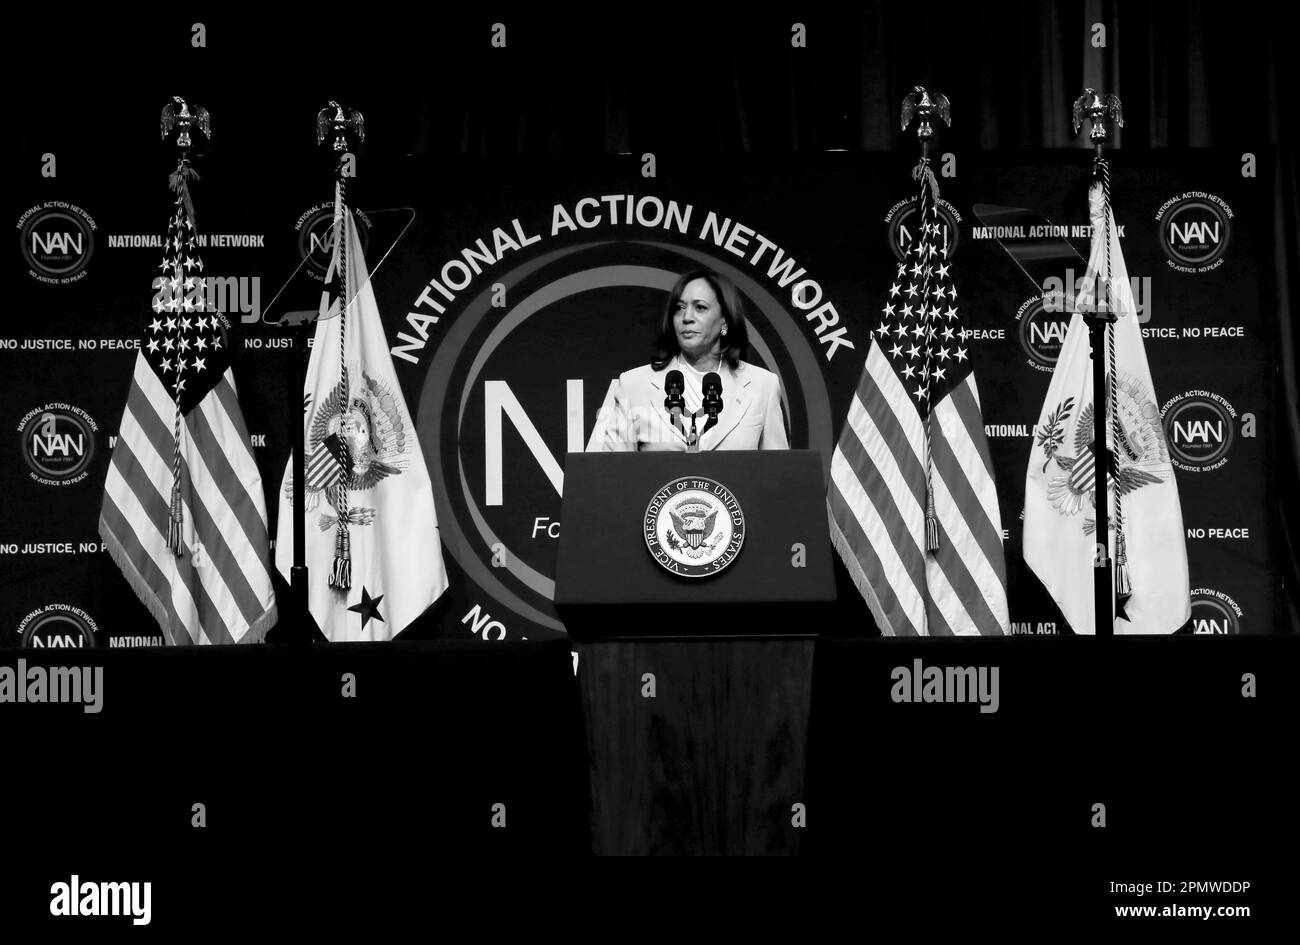 NEW YORK, NY - April 14: Hundreds gather to attend the 2023 National Action Network Convention Keynote Speaker Address by U.S. Vice President Kamala Harris held at the Sheraton Times Square Hotel on April 14, 2023 in the Times Square section of New York City. Chris Moore/MediaPunch Credit: MediaPunch Inc/Alamy Live News Stock Photo